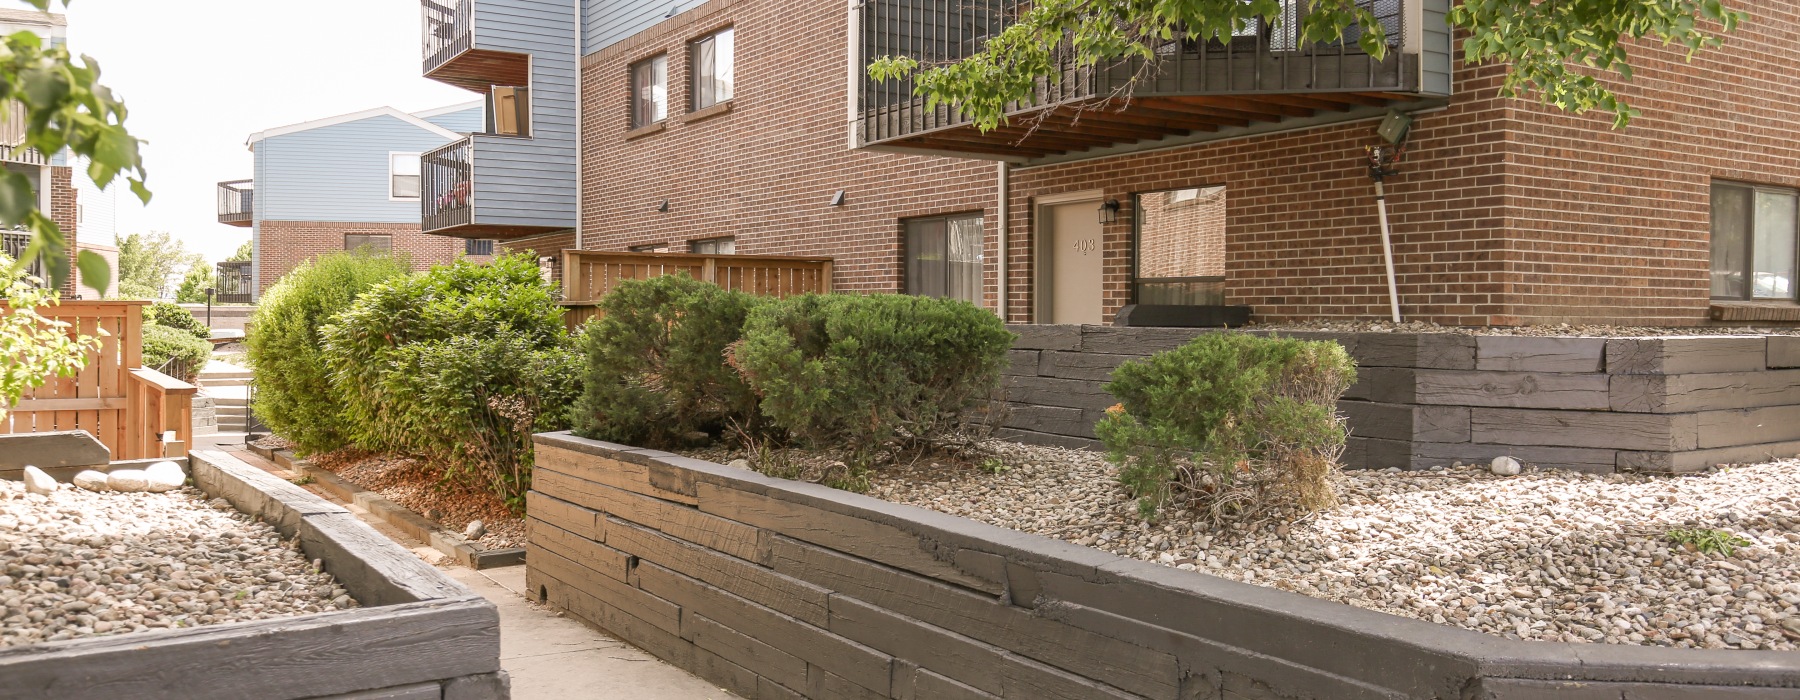 Apartment building exterior with plants and landscaping